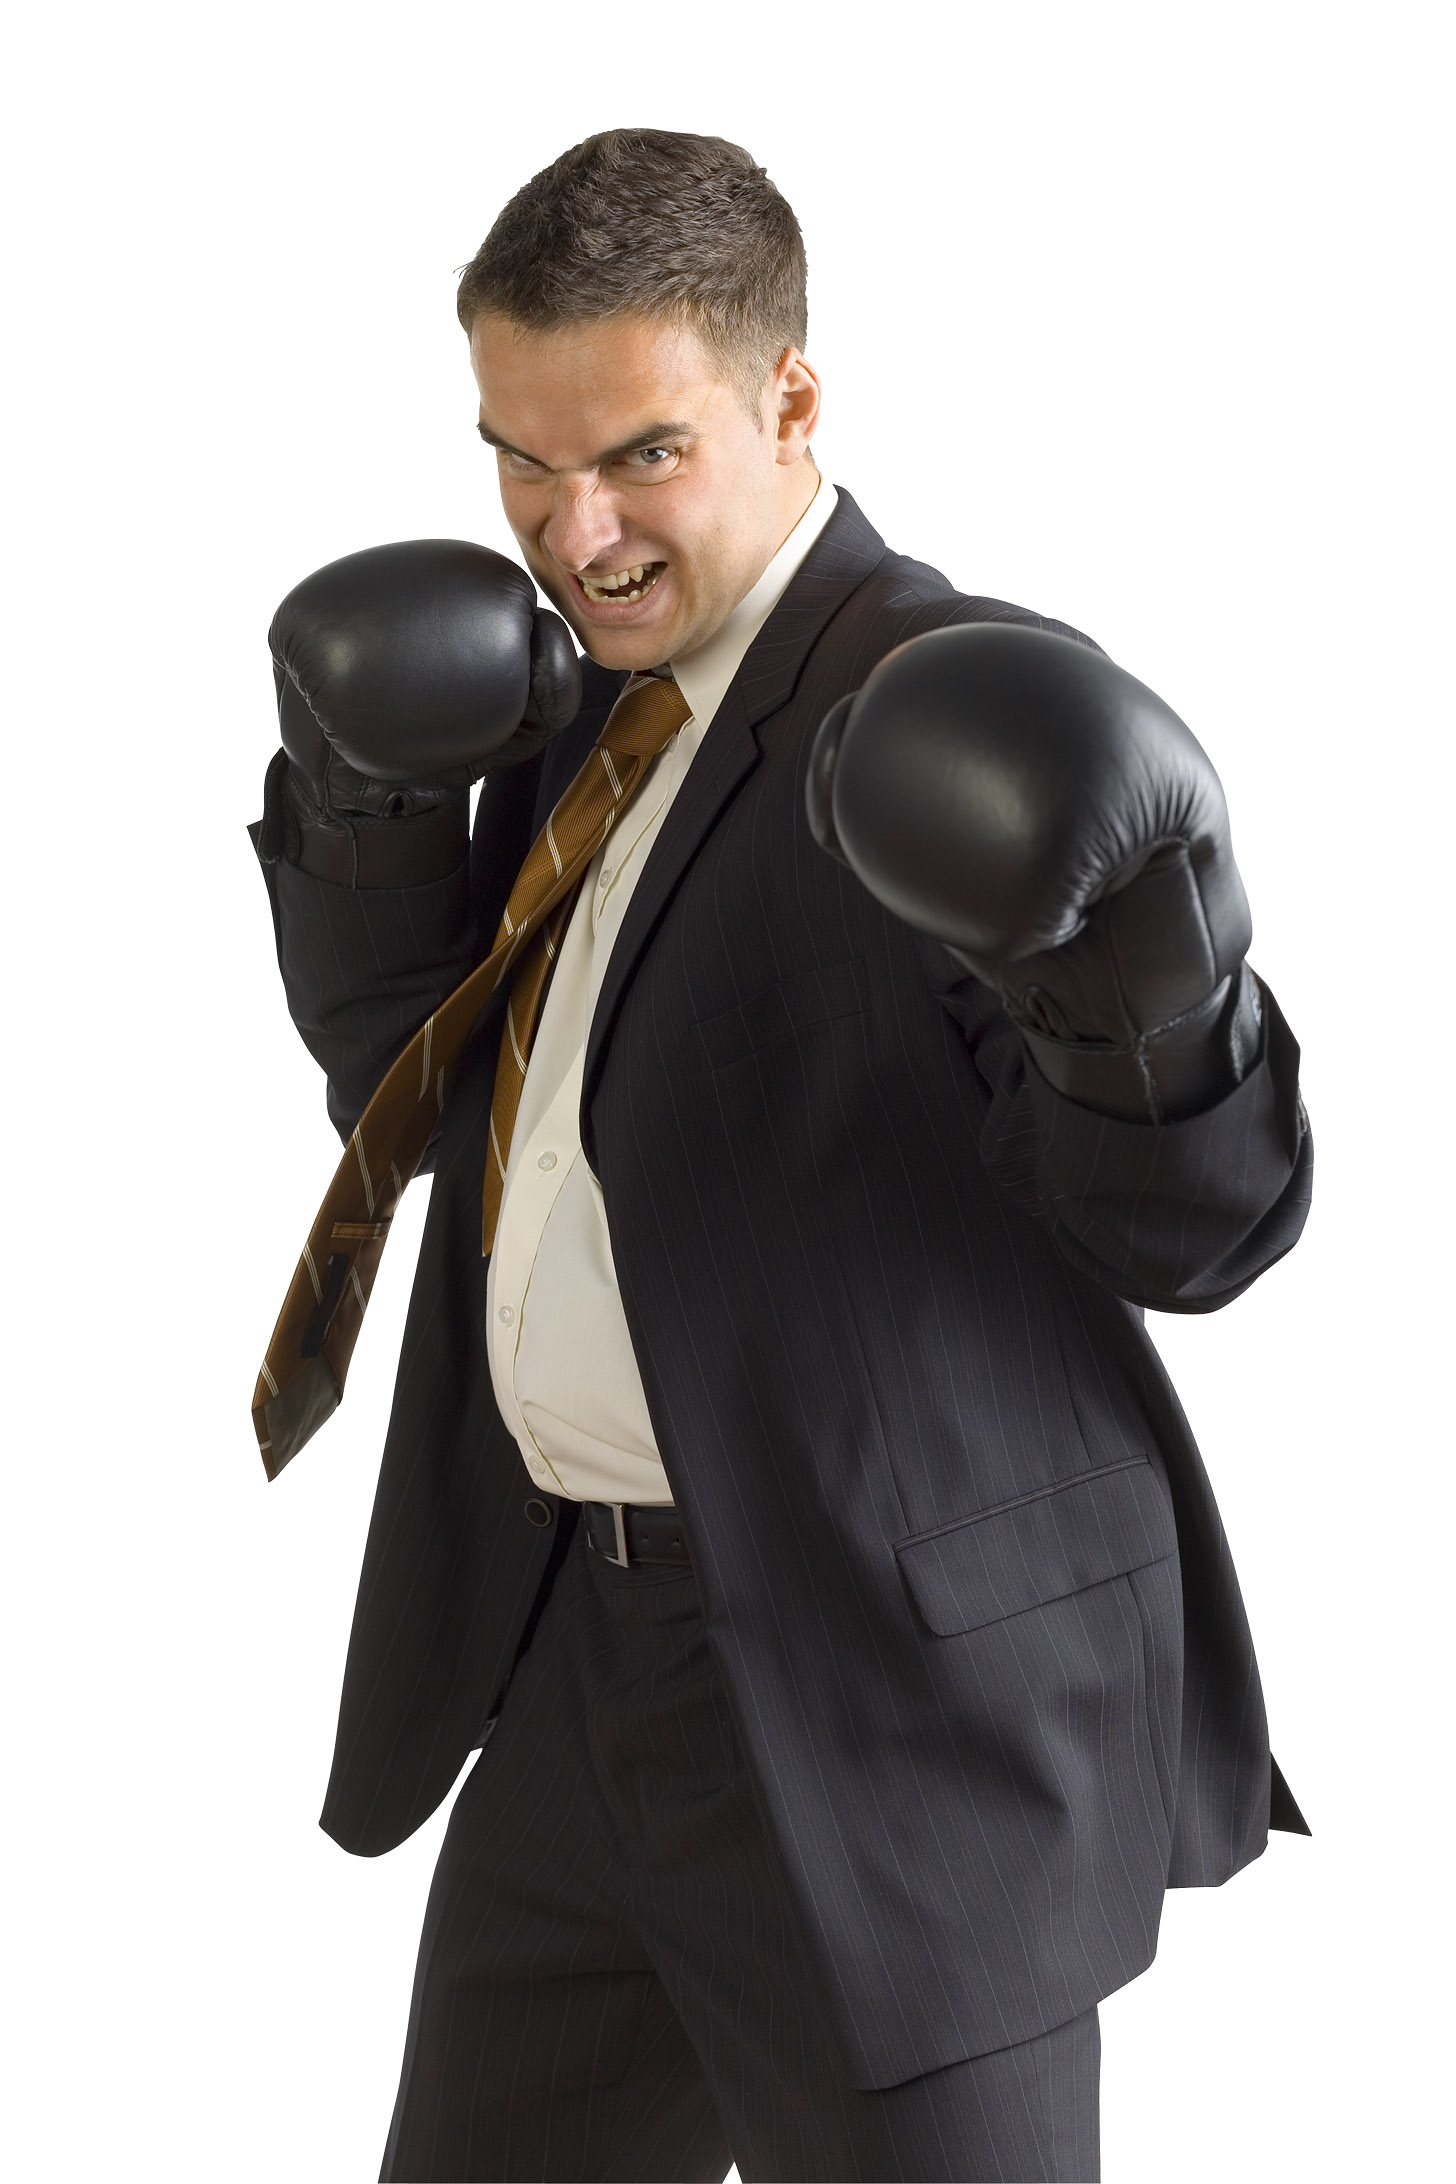 businessman with boxing gloves